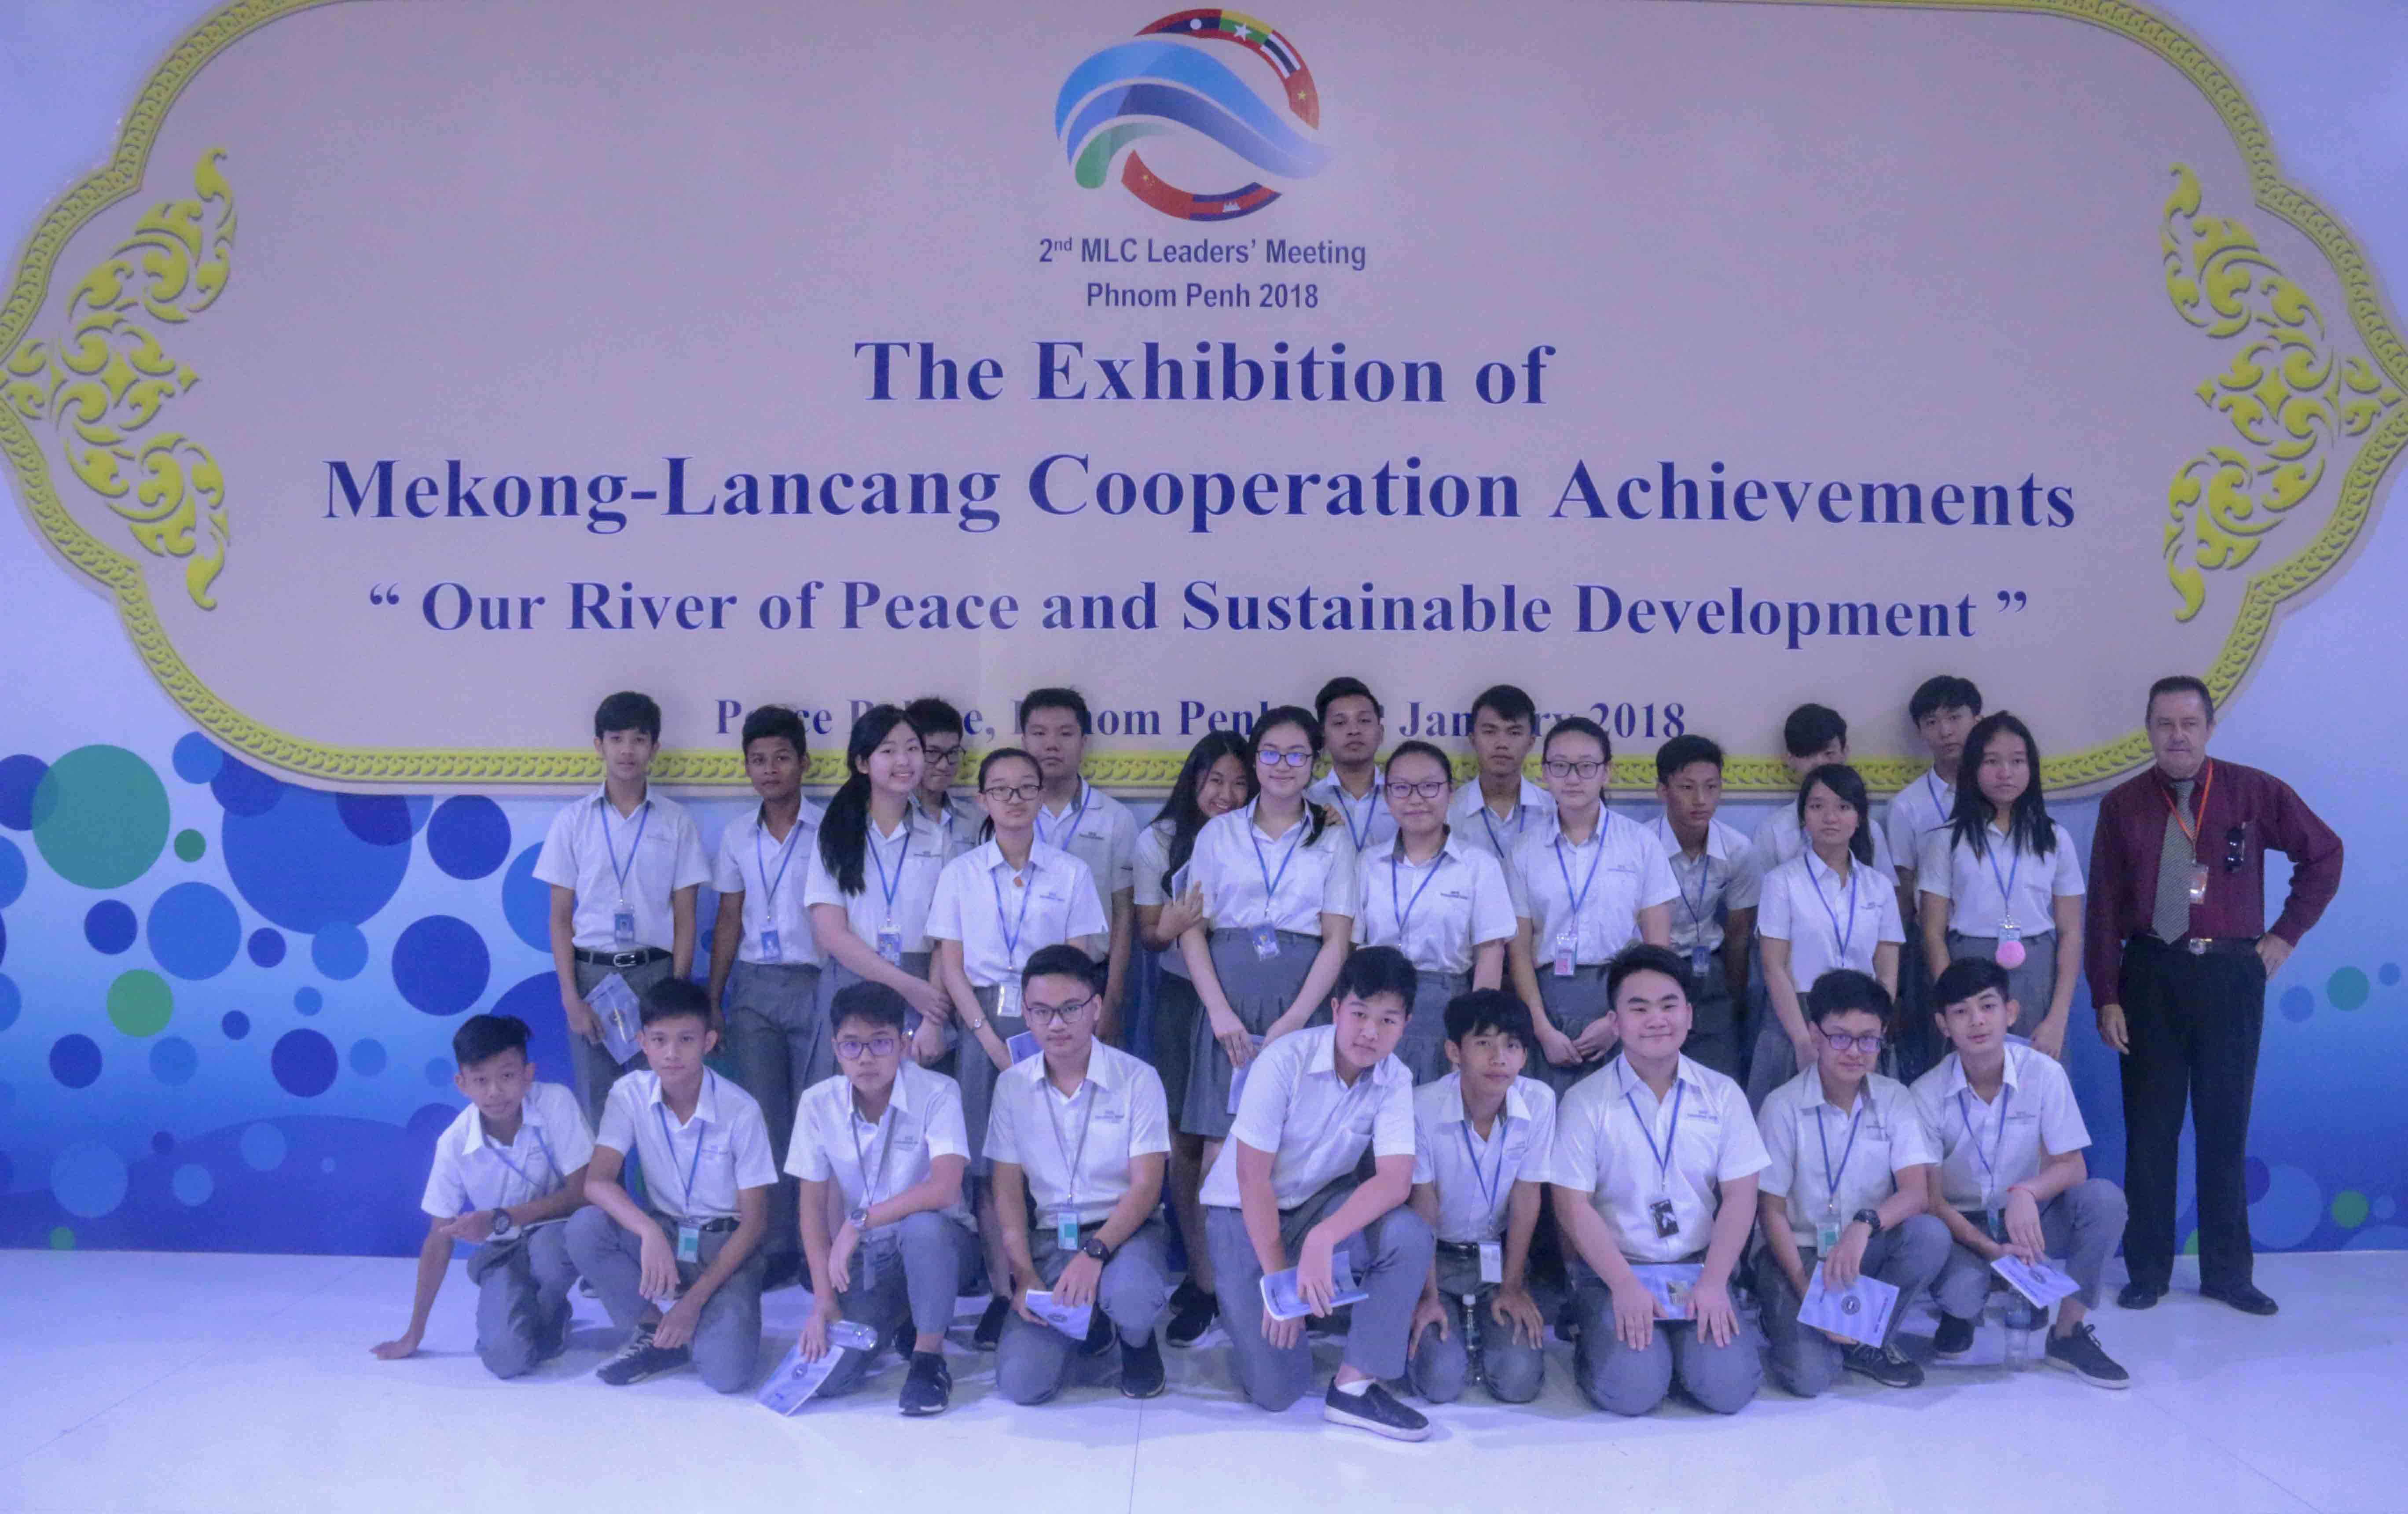 The Exhibition of Mekong-Lancang Cooperation Achievements